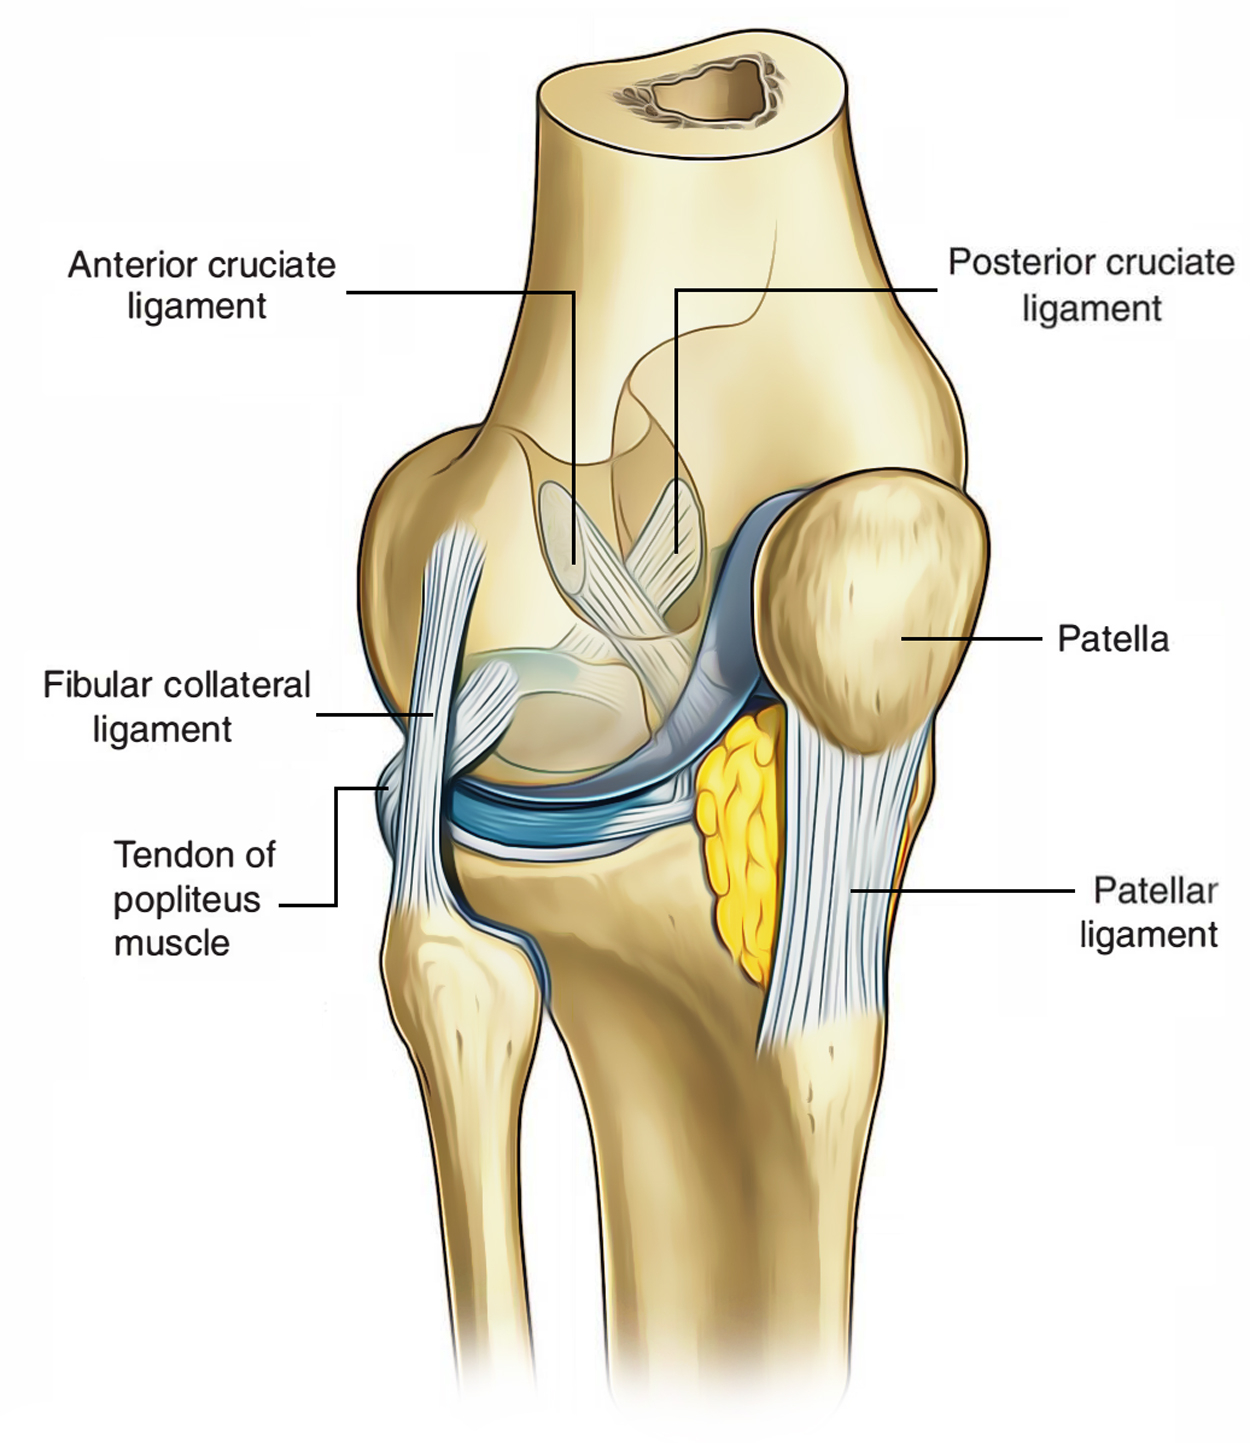 Diagram Of The Knee Easy Notes On Ligaments Of The Knee Jointlearn In Just 3 Minutes